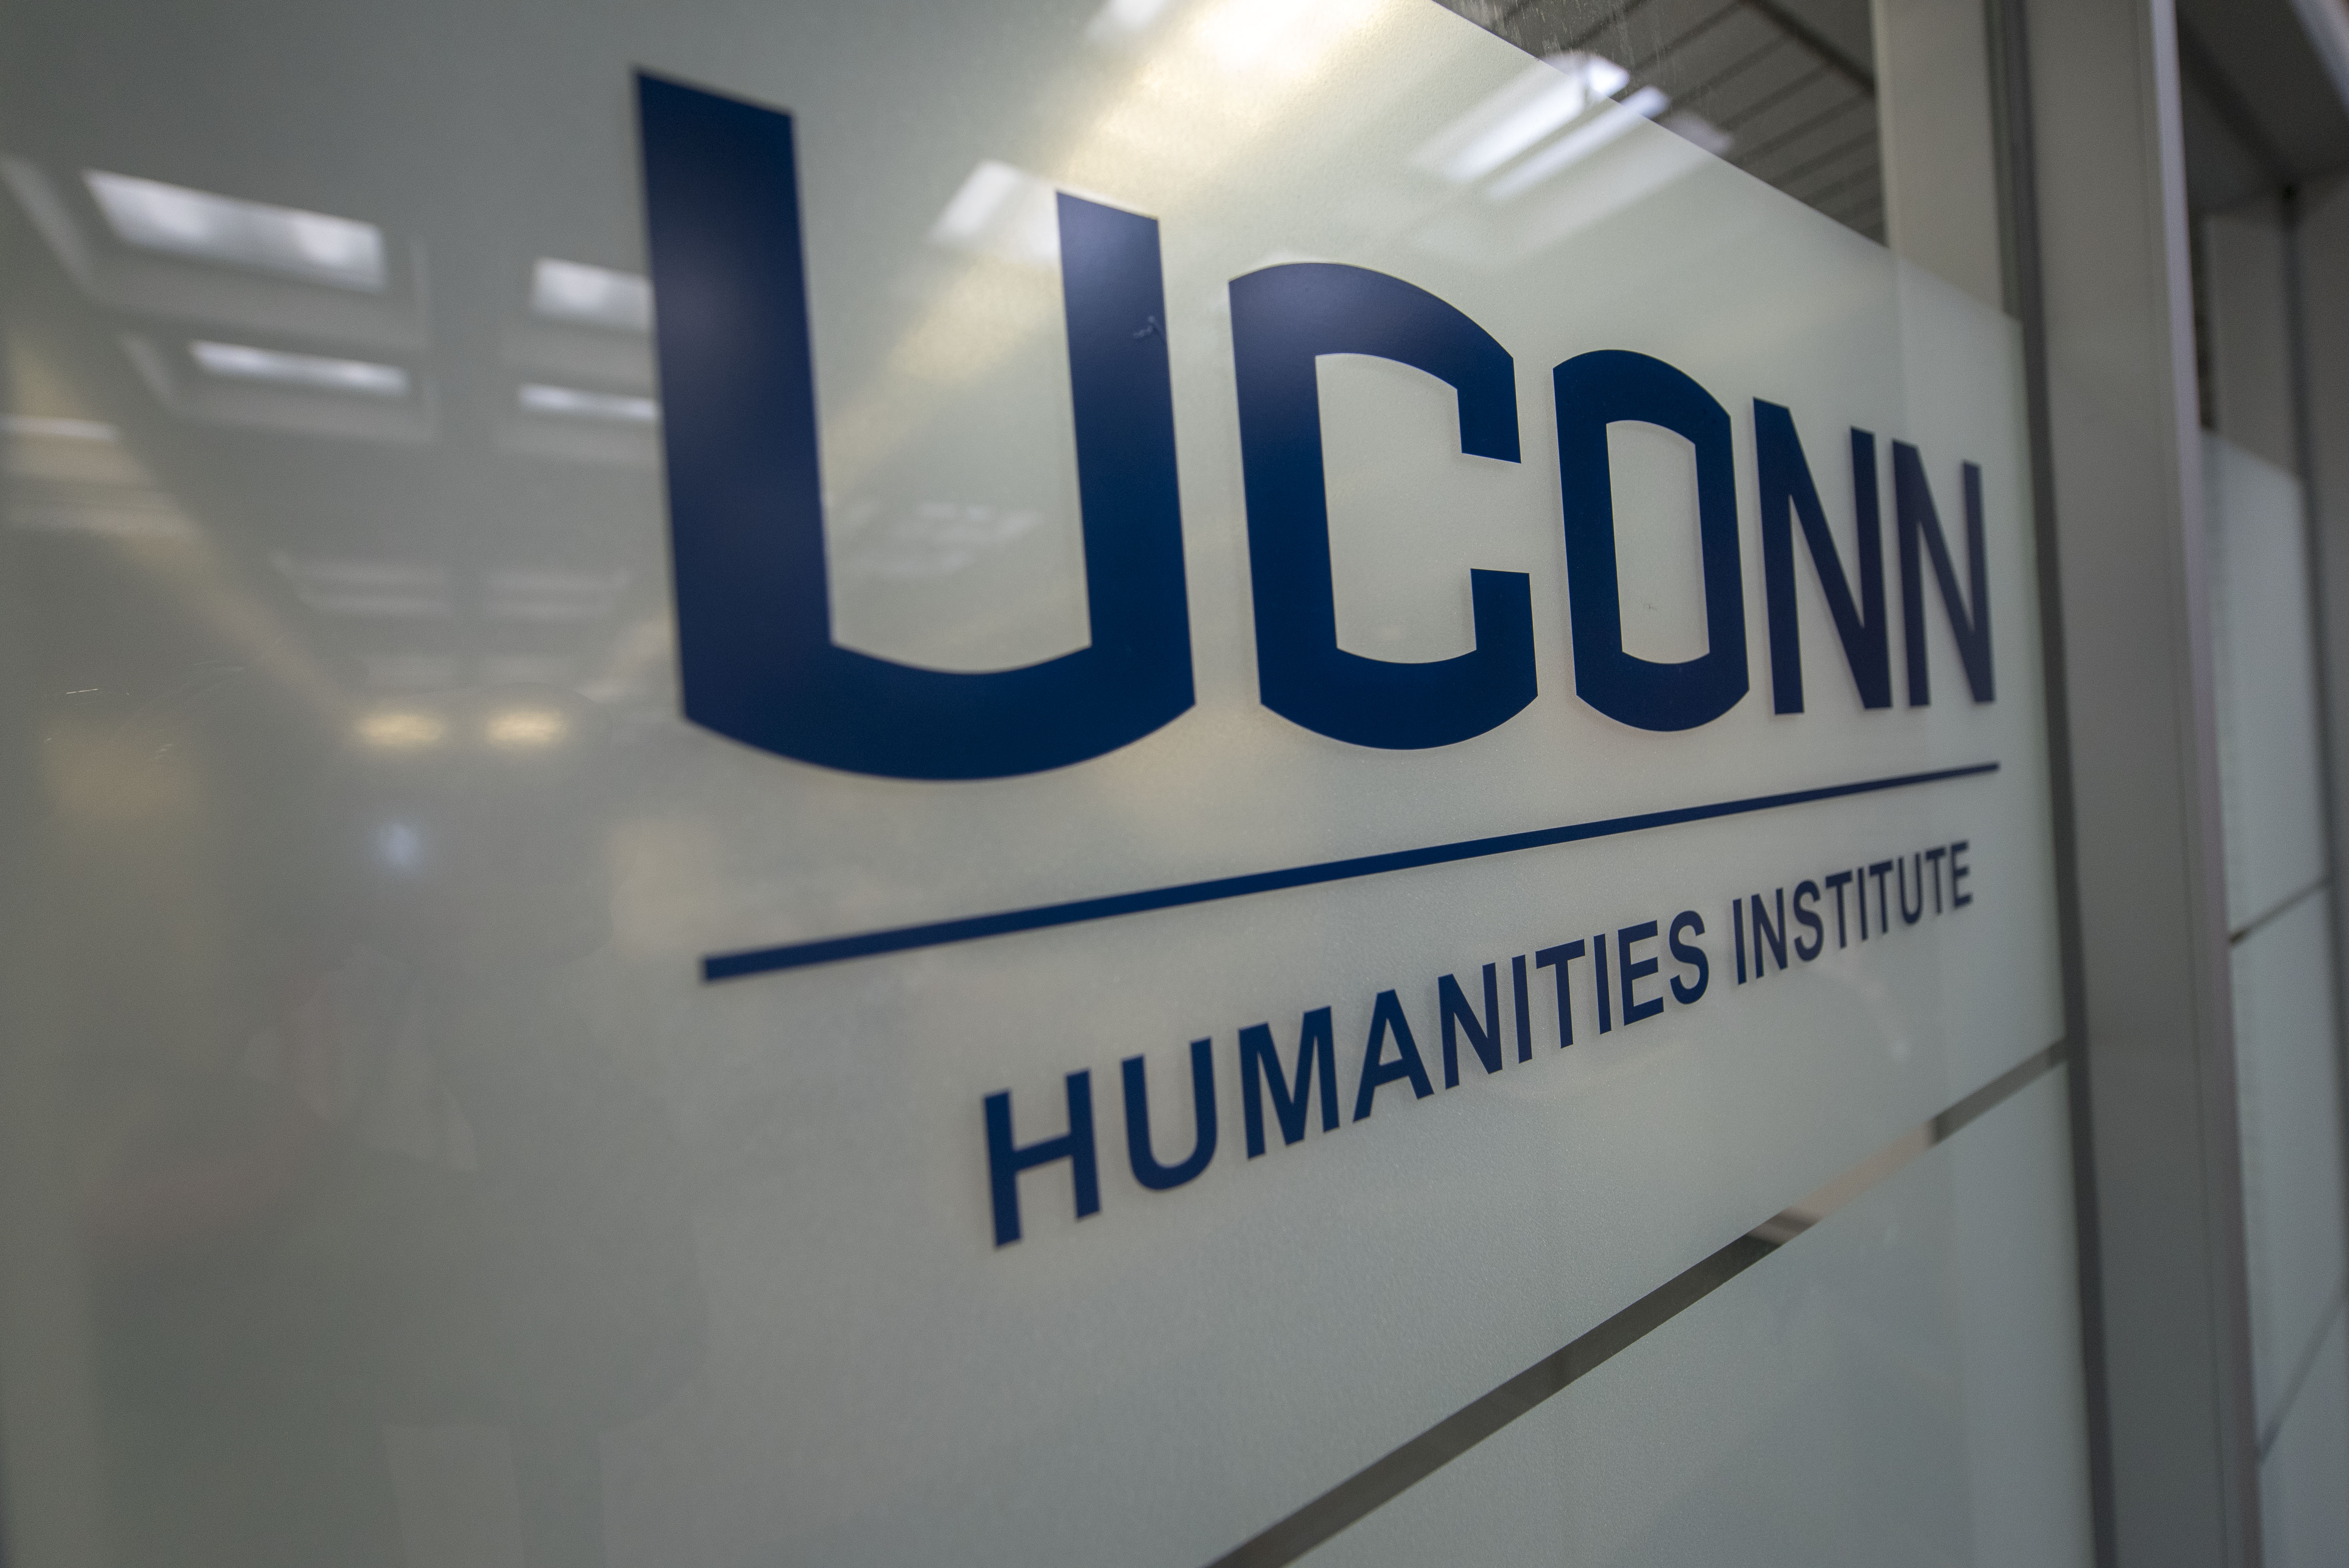 The logo of the UConn Humanities Institute